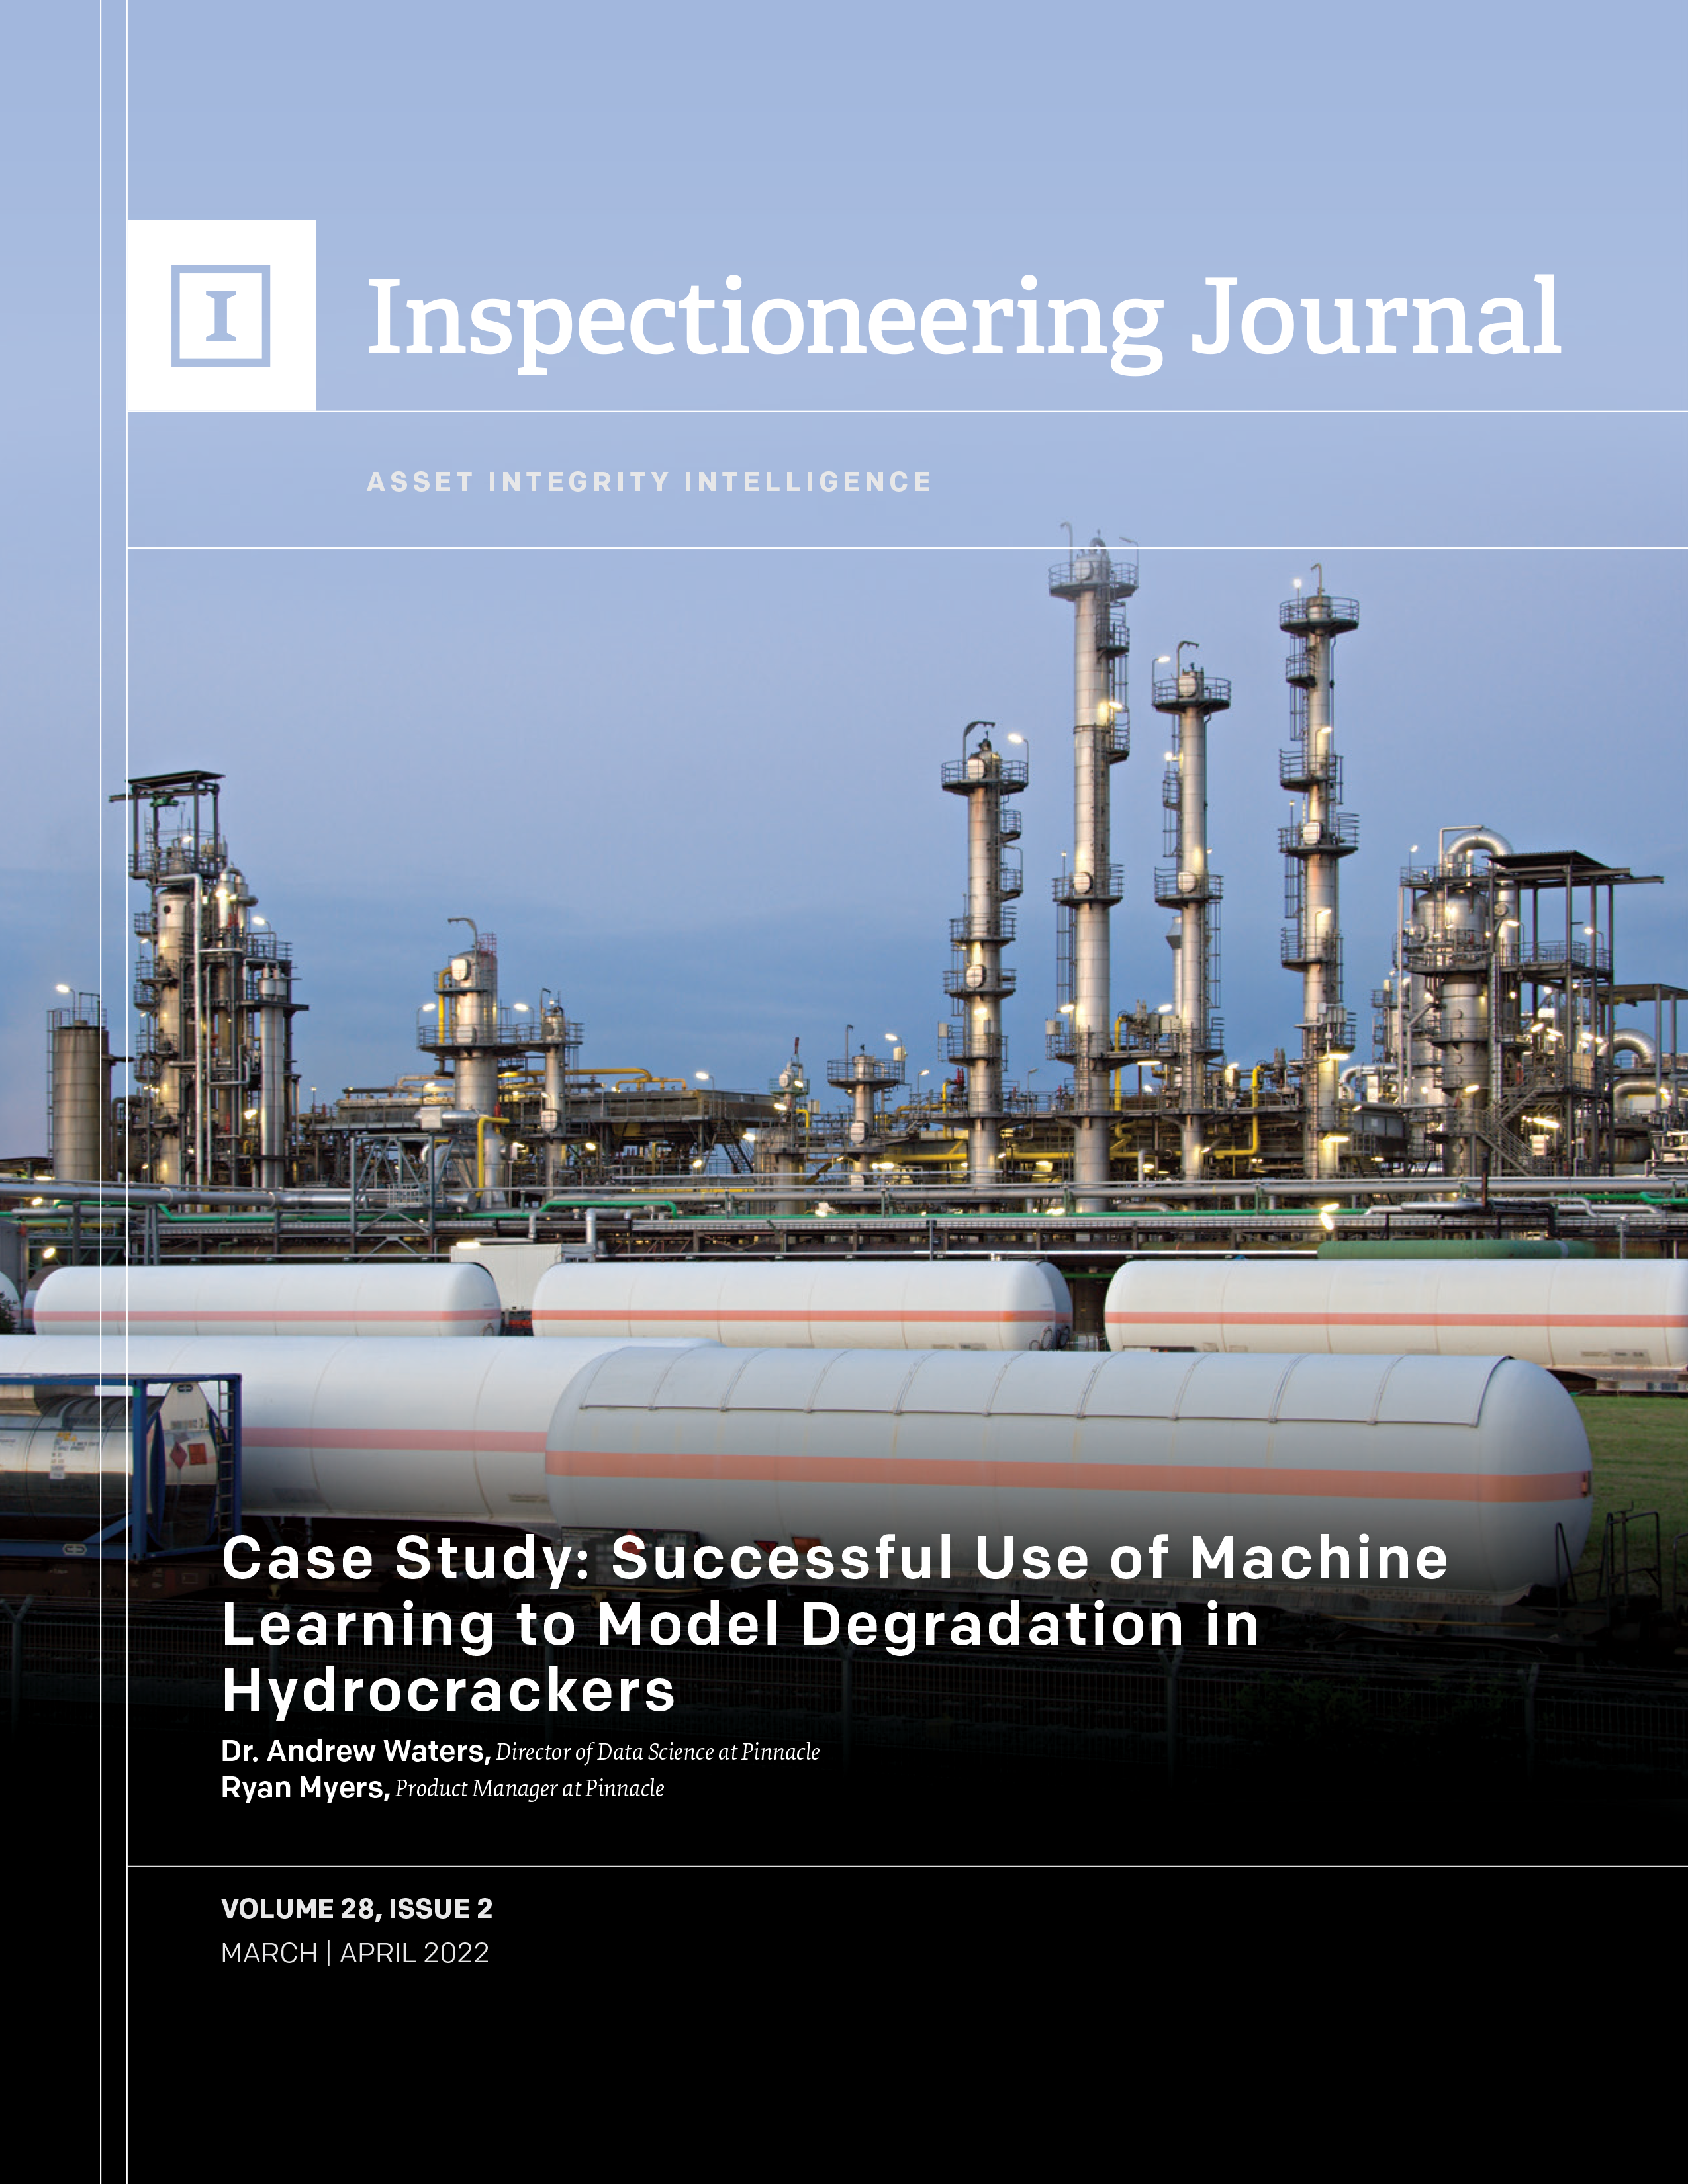 Pinnacle_Case-Study-Successful-Use-of-Machine-Learning-to-Model-Degradation-in-Hydrocrackers Cover